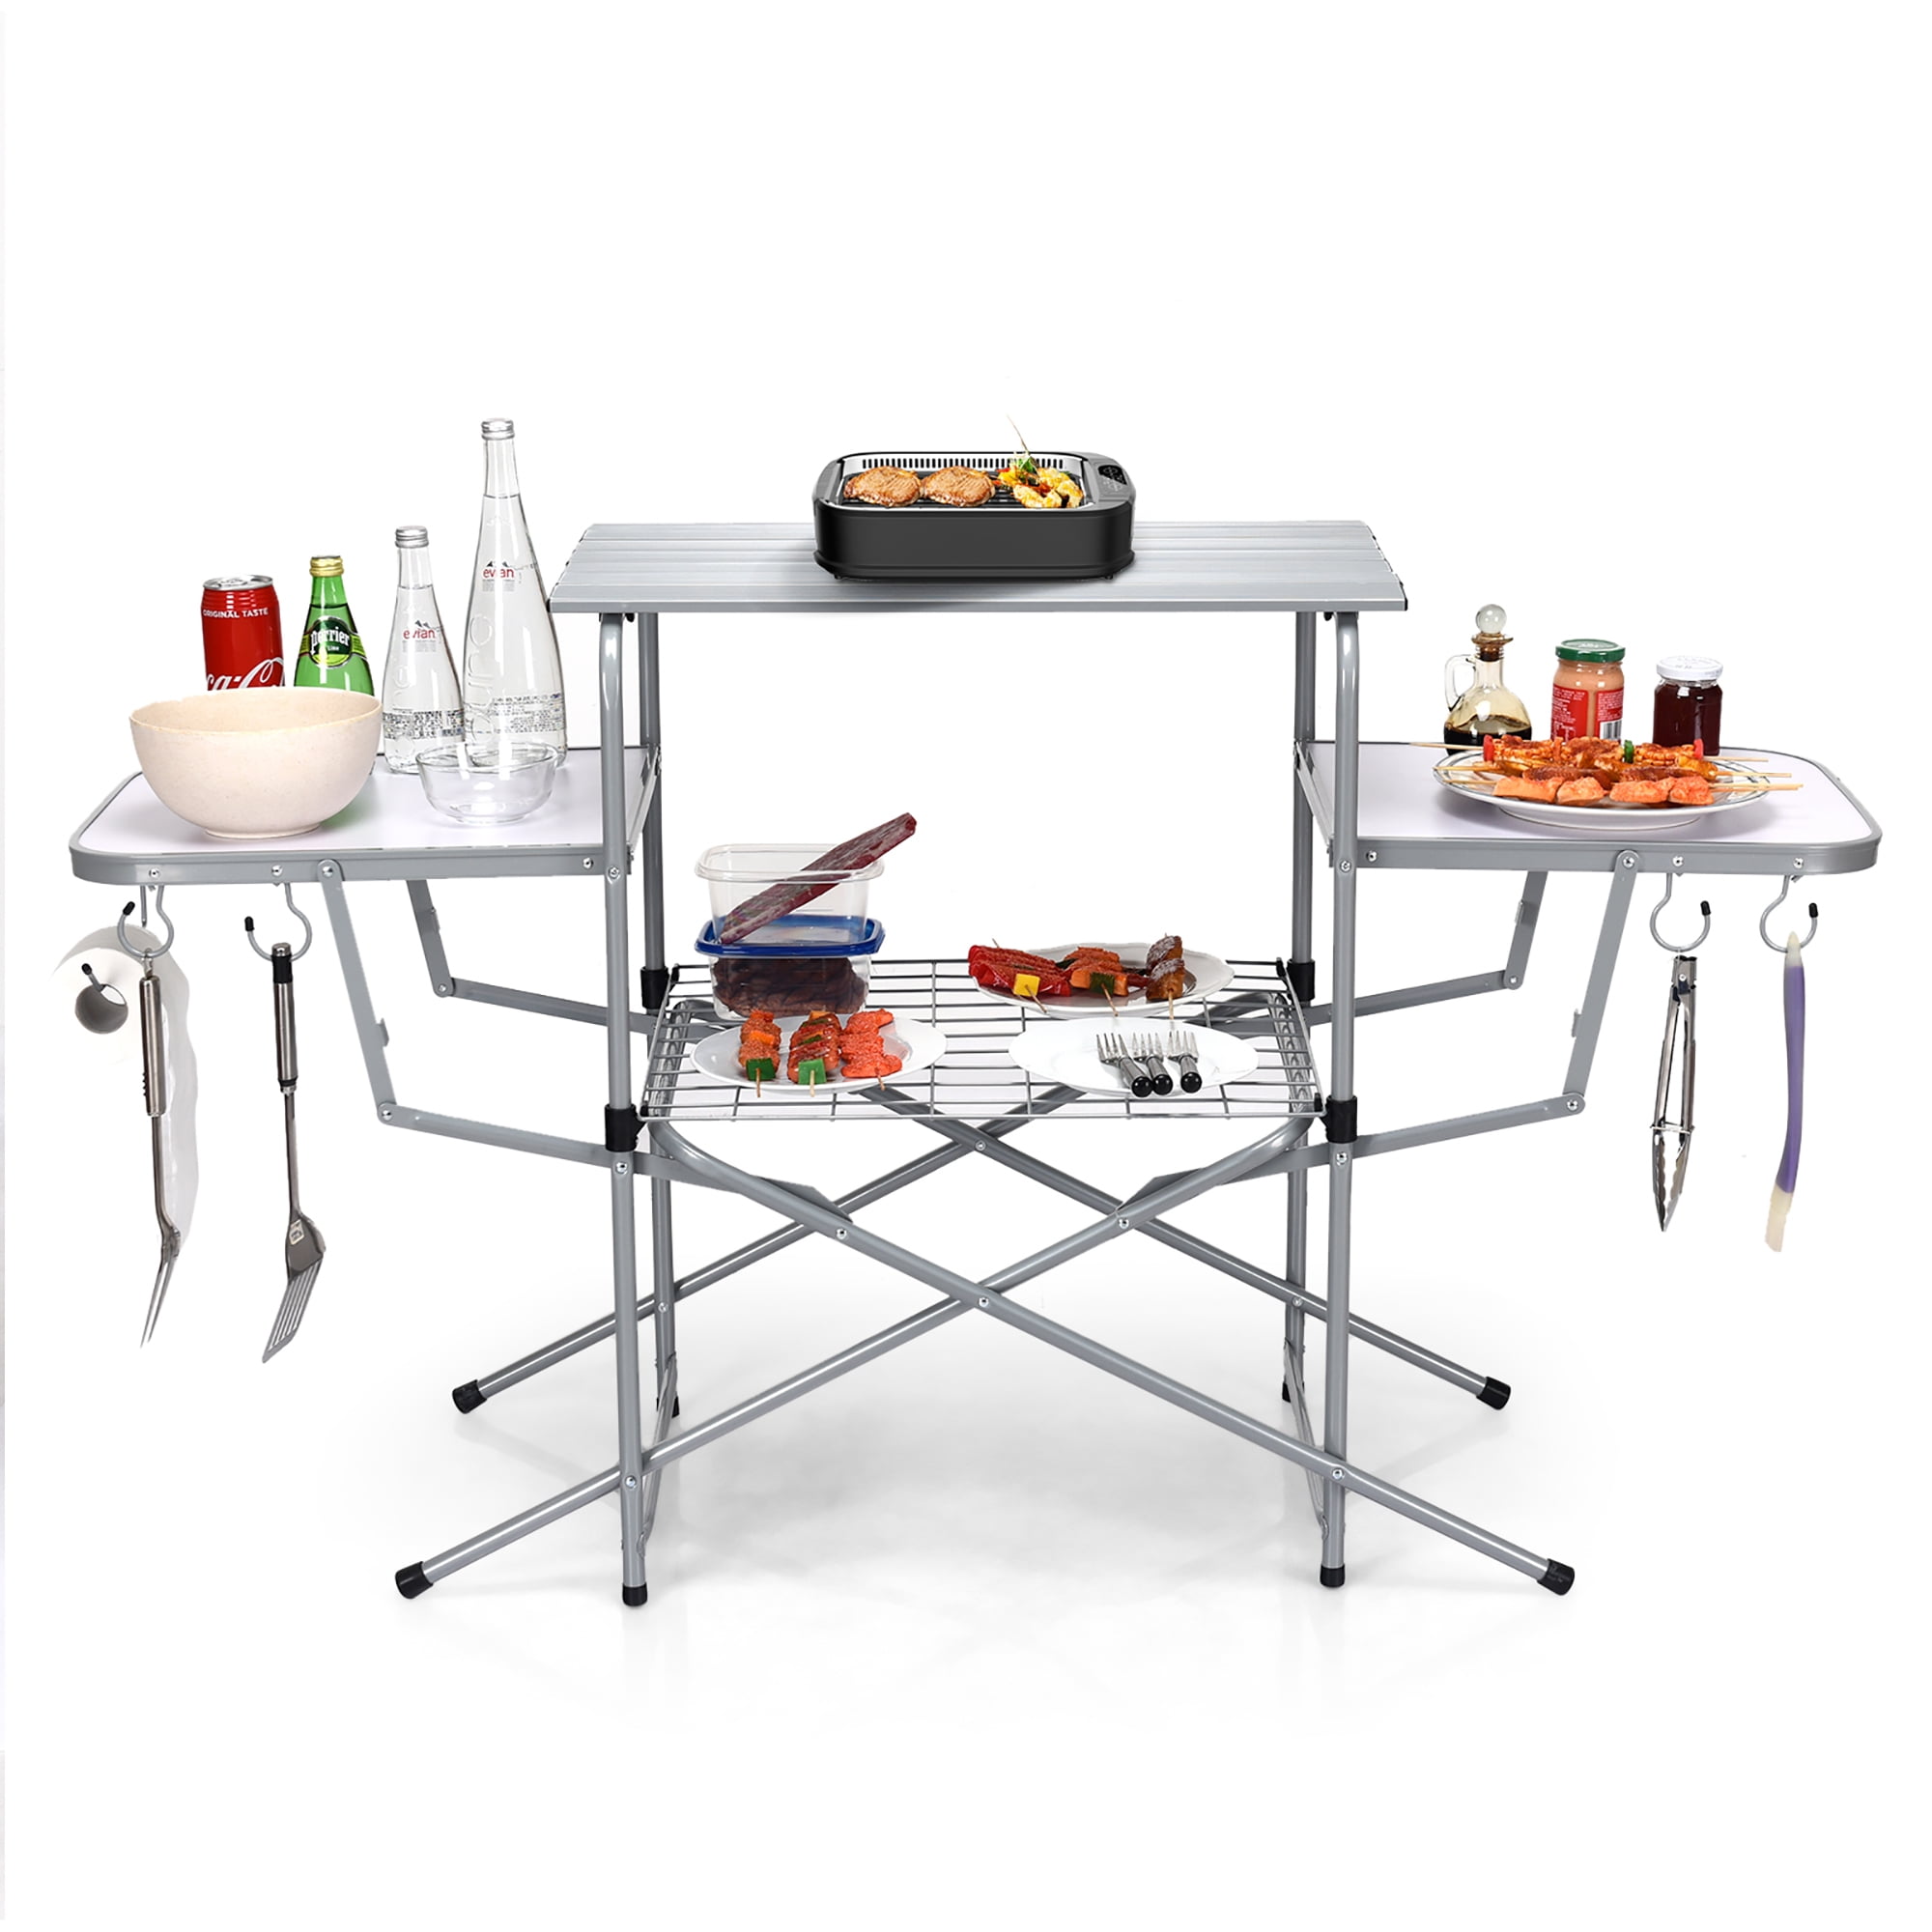 Foldable Camping Table Outdoor Kitchen Portable Grilling Stand Durable BBQ Table 